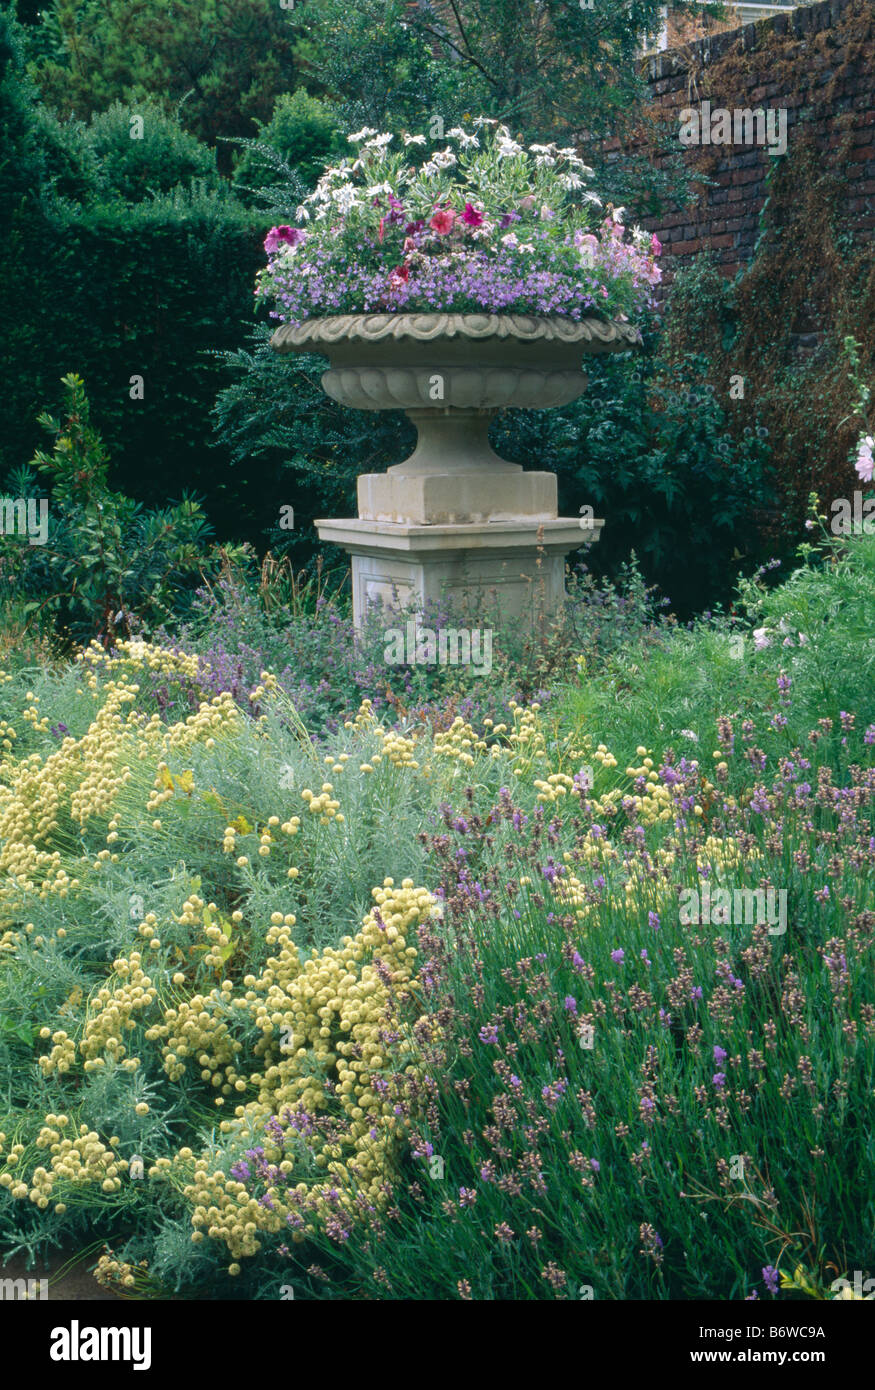 Petunias and lobelia in stone urn on plinth in walled summer garden border with yellow helichrysum and lavender Stock Photo